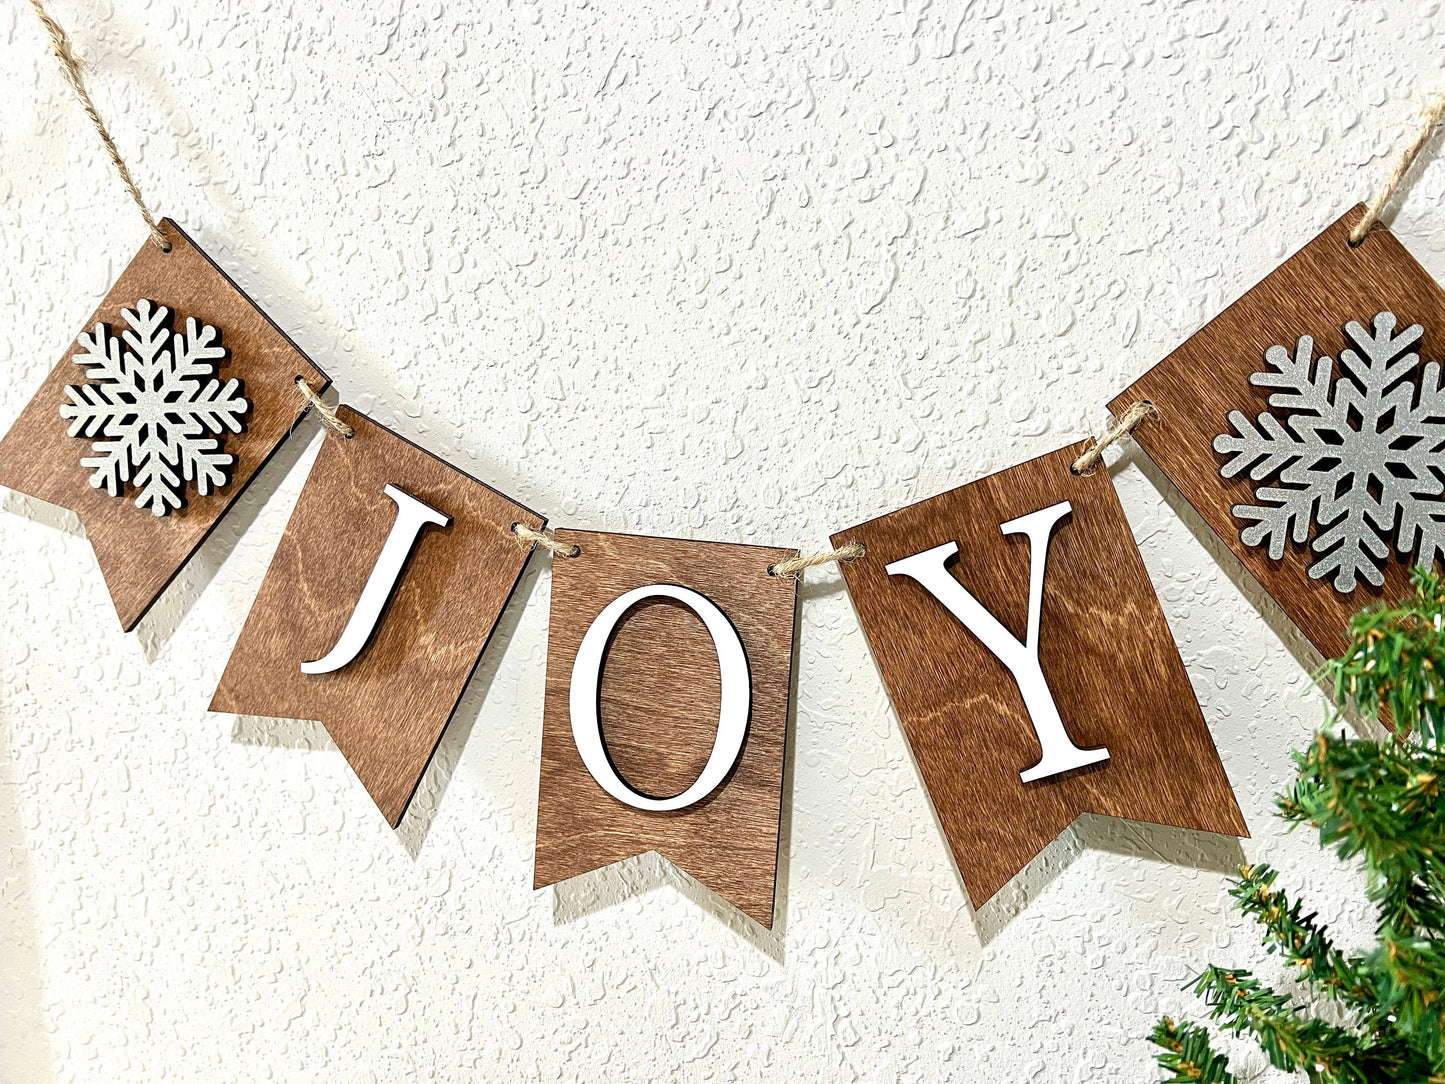 Wooden Joy Banner, wood holiday banner, rustic holiday garland, Christmas decor, fireplace mantel decoration, merry christmas banner